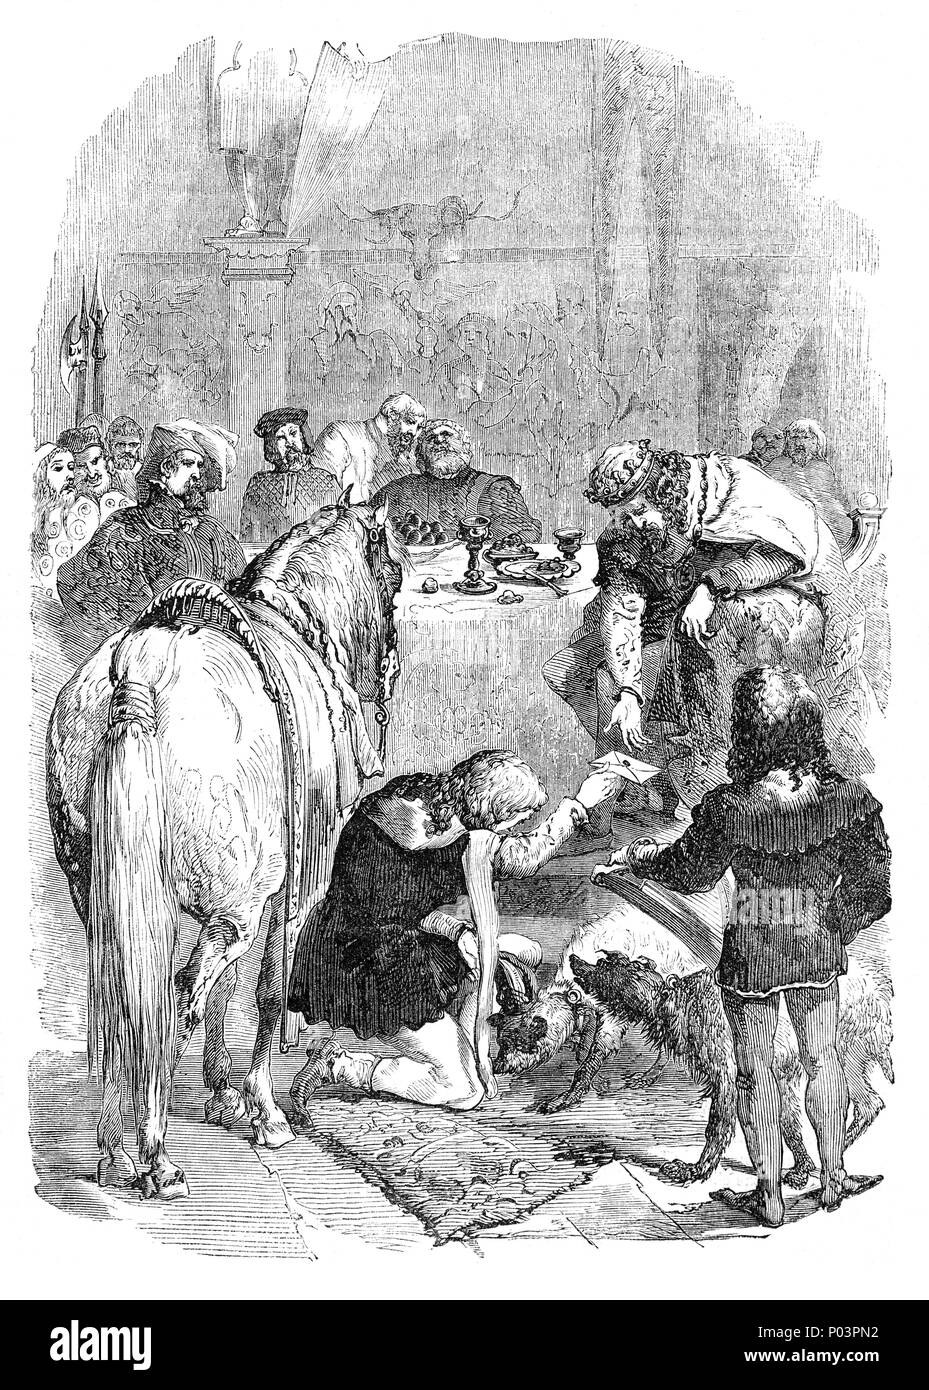 During the Feast of Pentecost in held in Westminster Great hall in 1316, a woman dressed as a minstrel approached King Edward II. She entered on a horse, acted like a minstrel at various tables until mounting the steps of the royal table she deposited a letter, and left rapidly on her horse. On opening the letter, the King found it contained severe criticism and censure of the king's conduct. Stock Photo